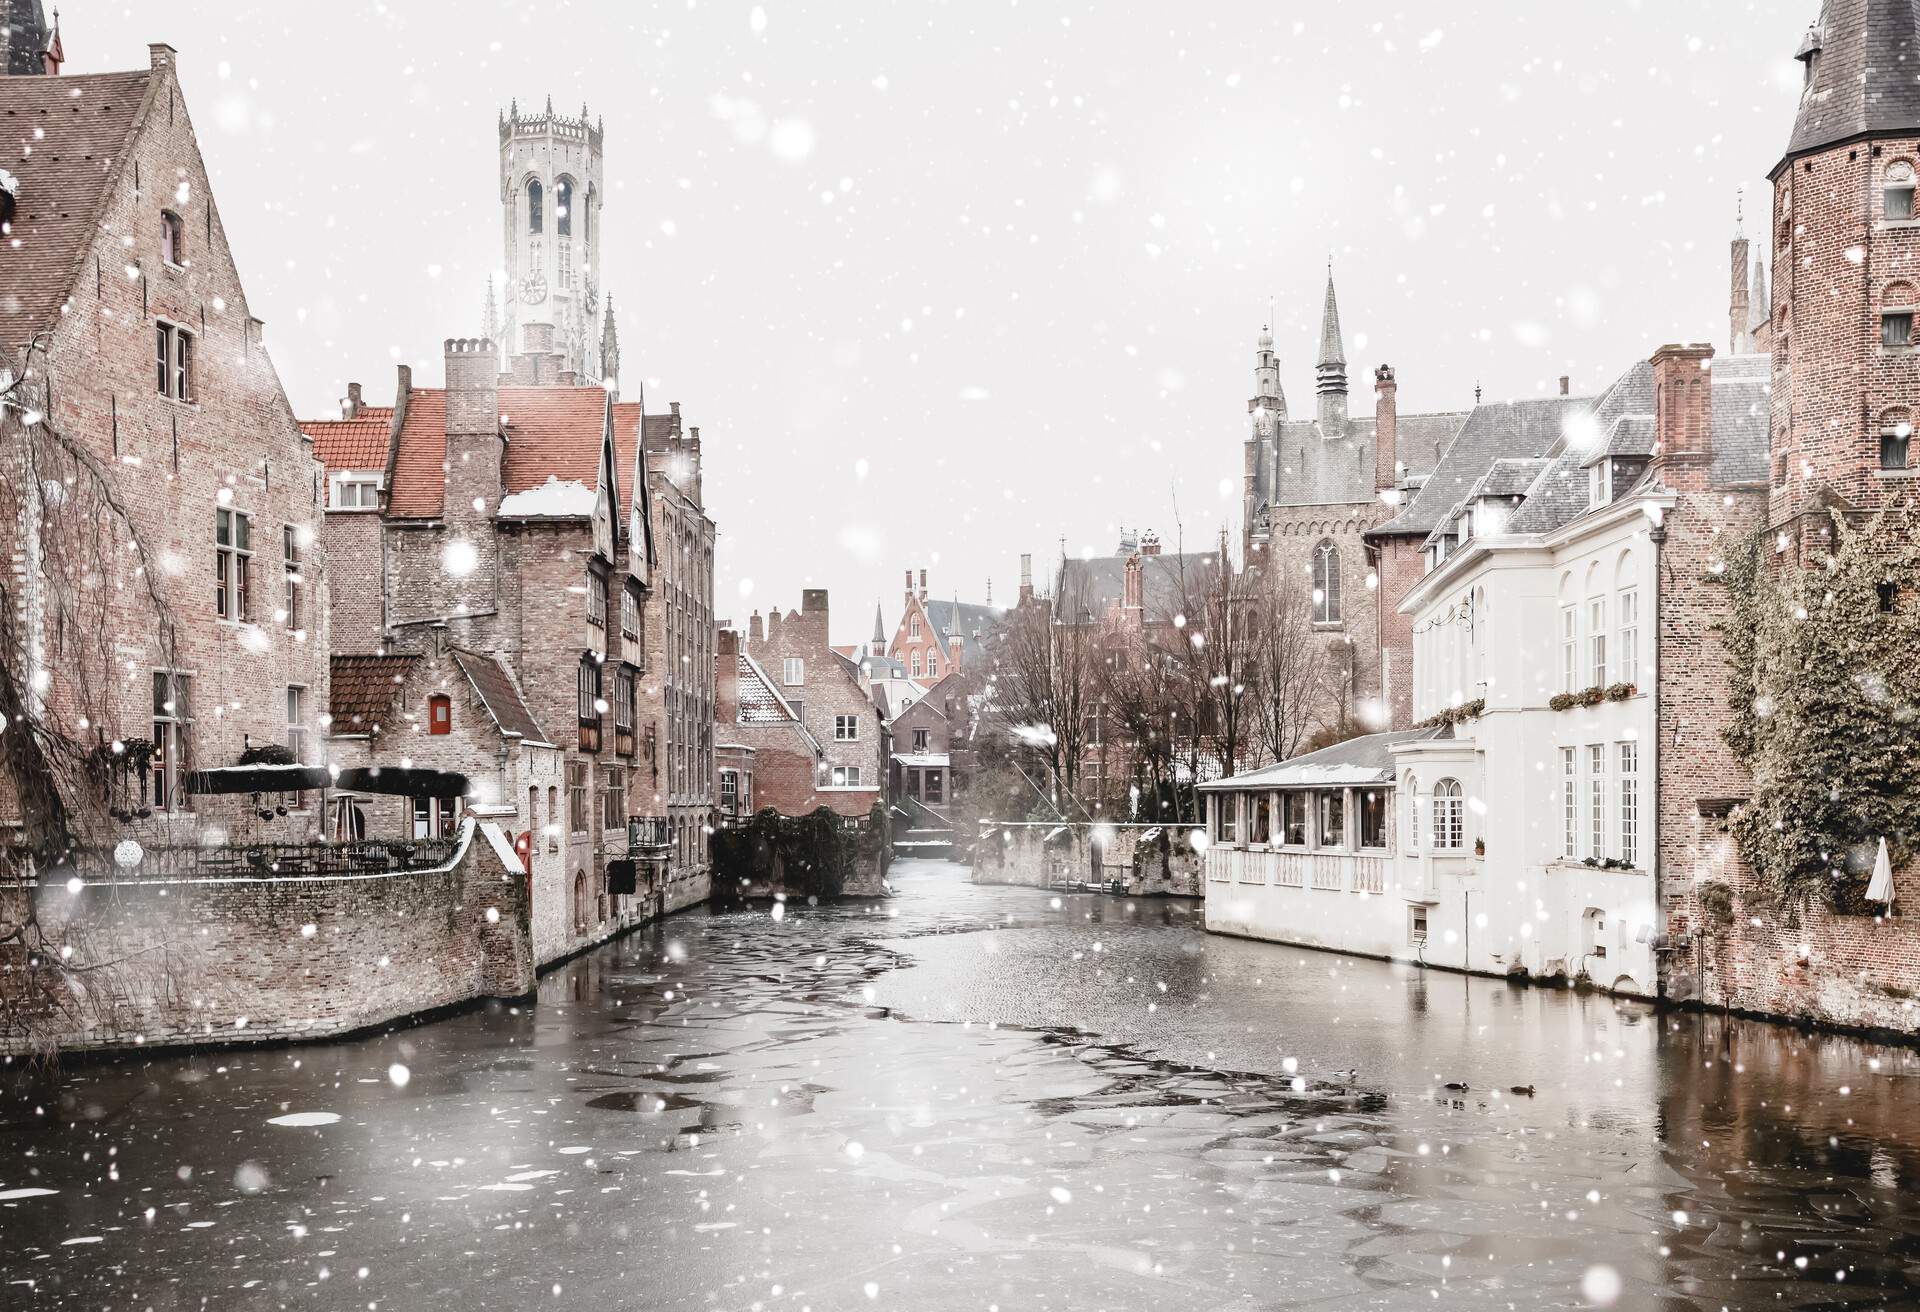 Bruges, Belgium canals view in winter snowfall. Stunning fairy landscape with historical buildings and calm icy water. Christmas mood. Monochromatic neutral tones with natural light